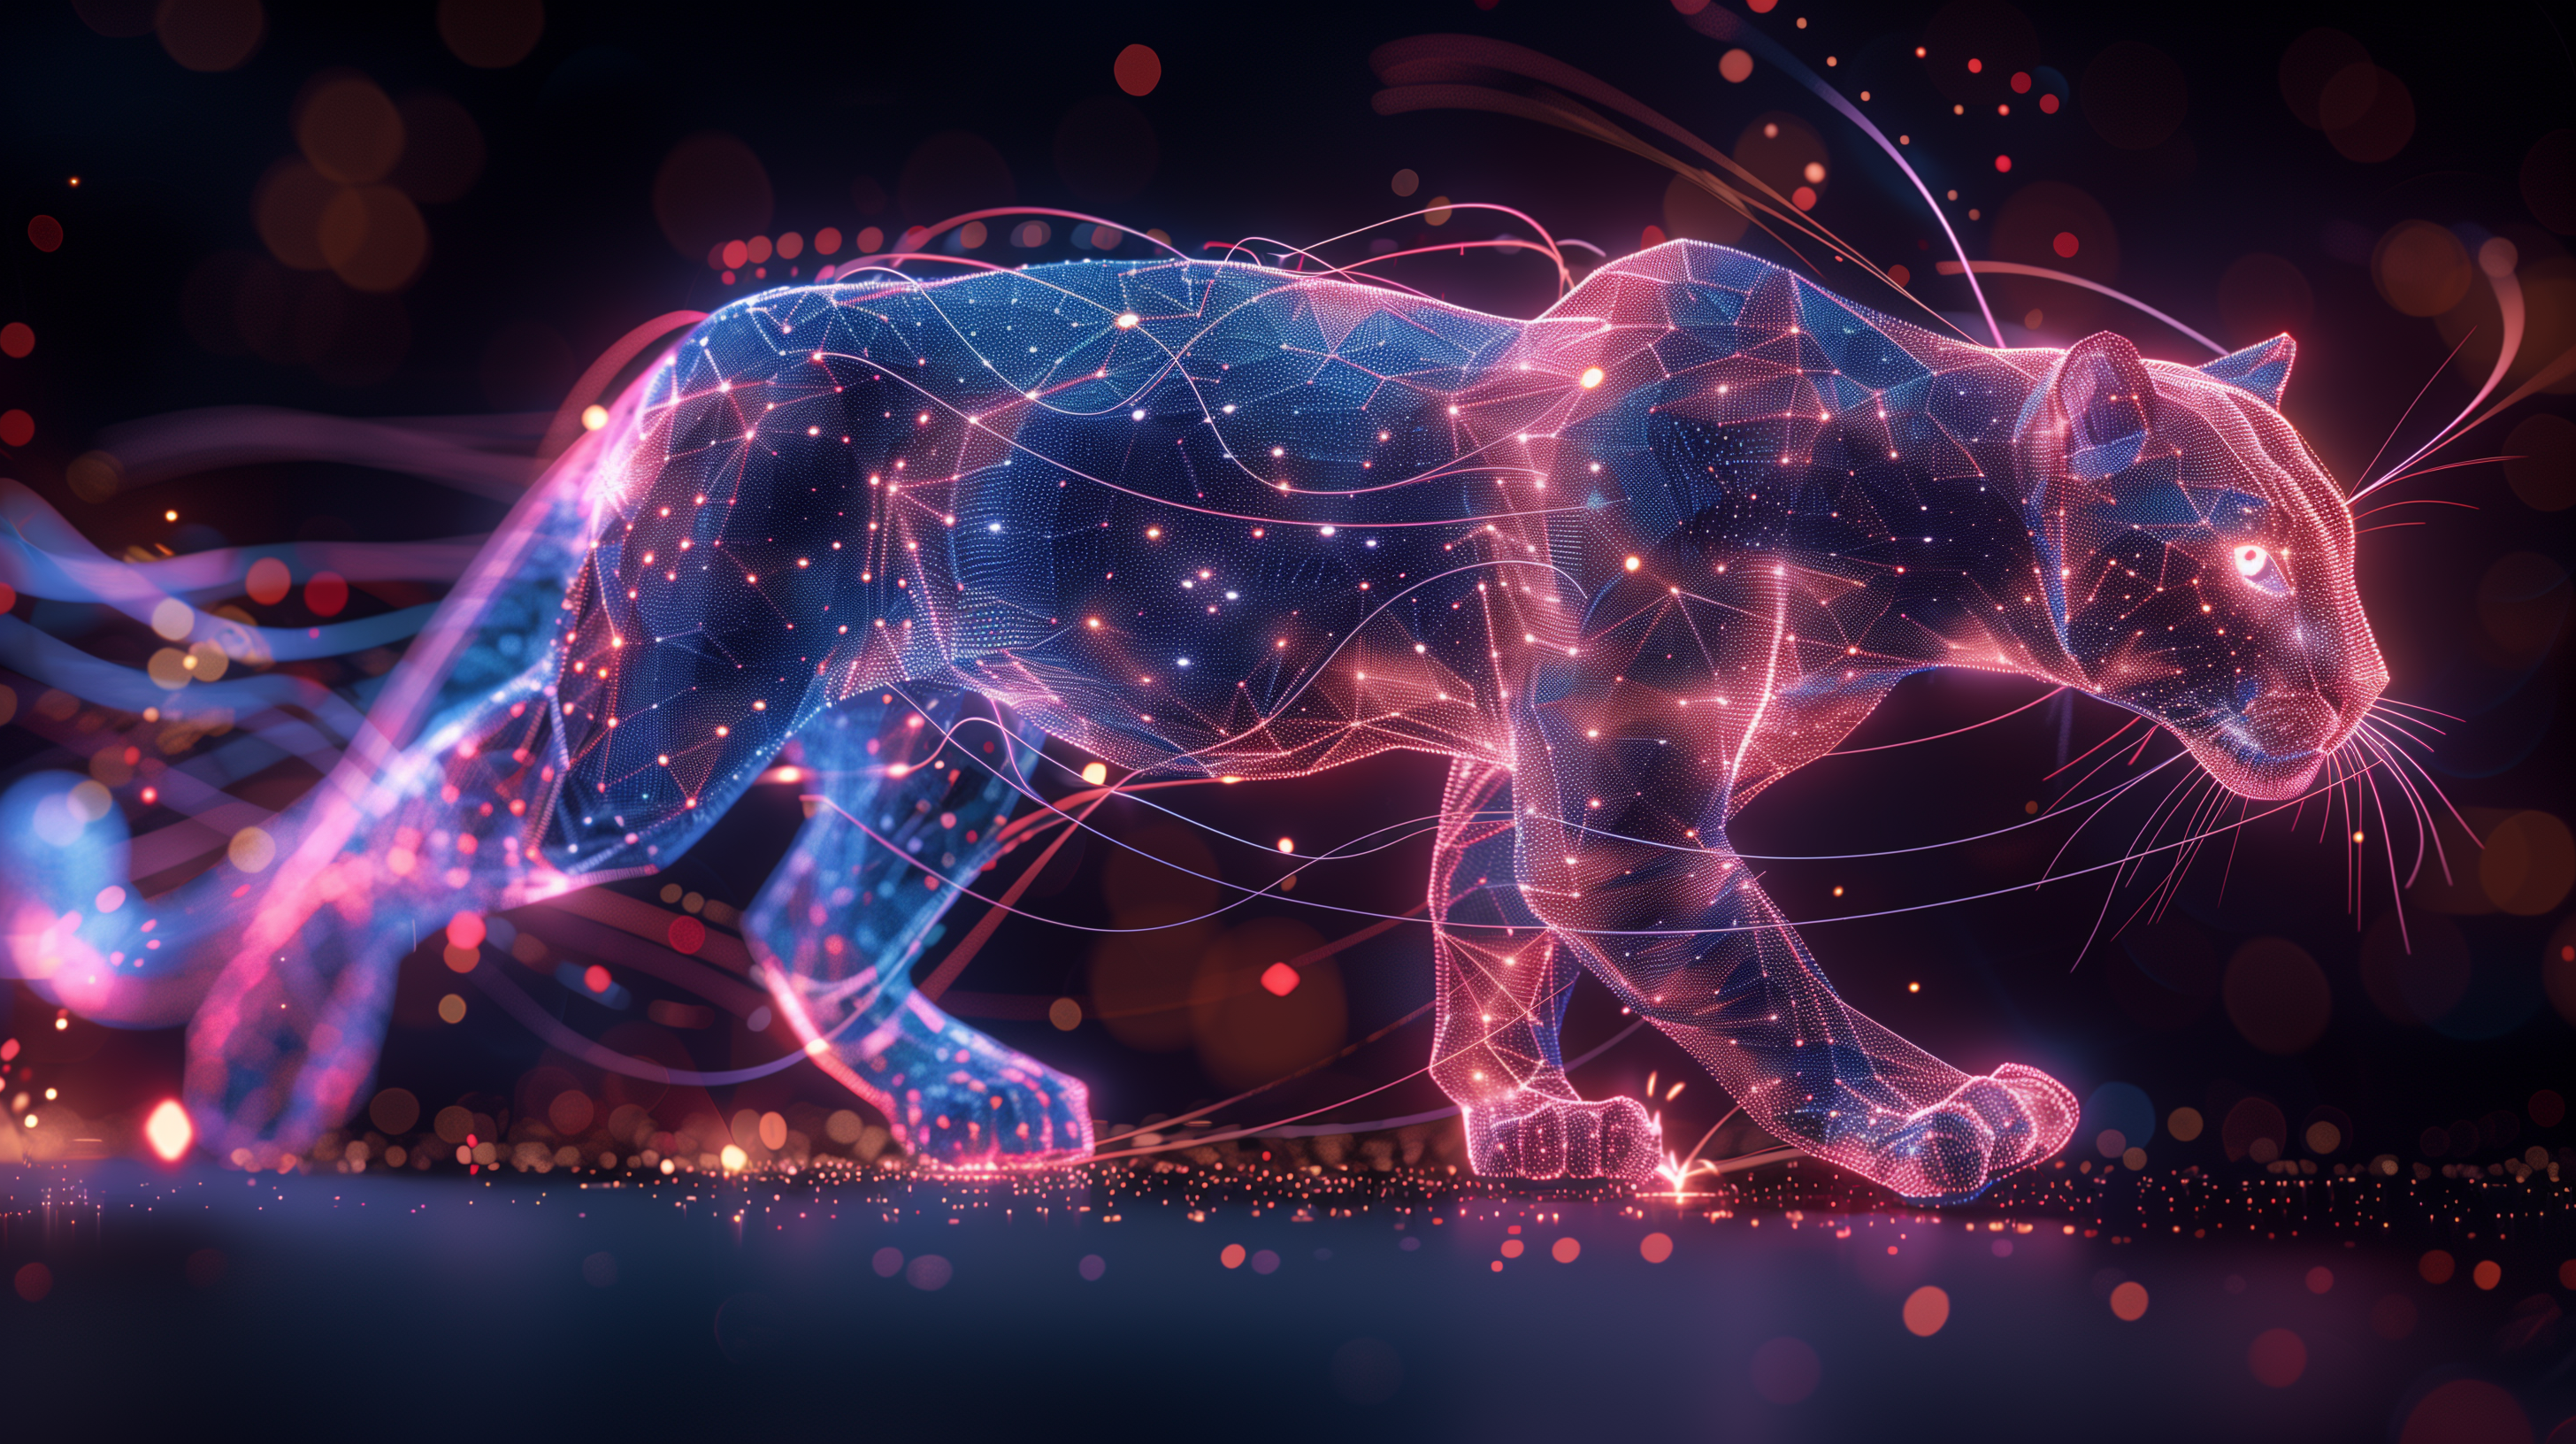 A wireframe panther in pink and neon purple surrounded by colorful streams and glowing dots.